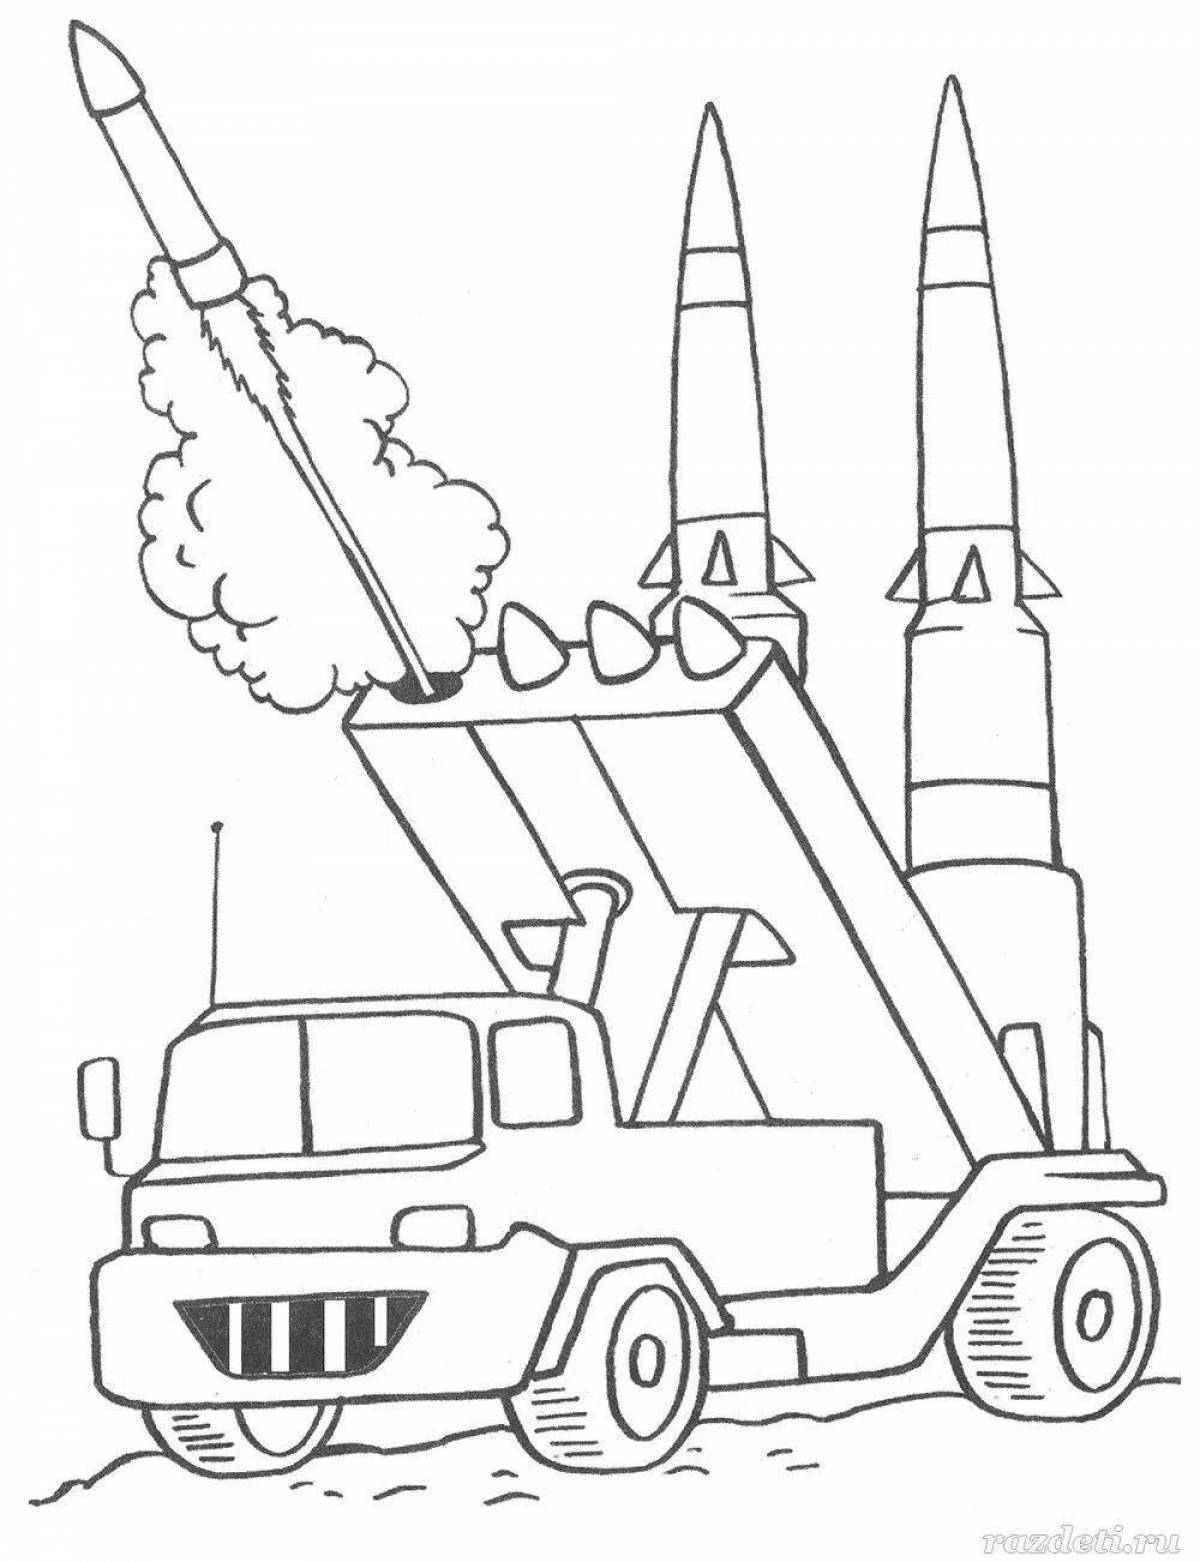 Great military vehicle coloring book for preschoolers